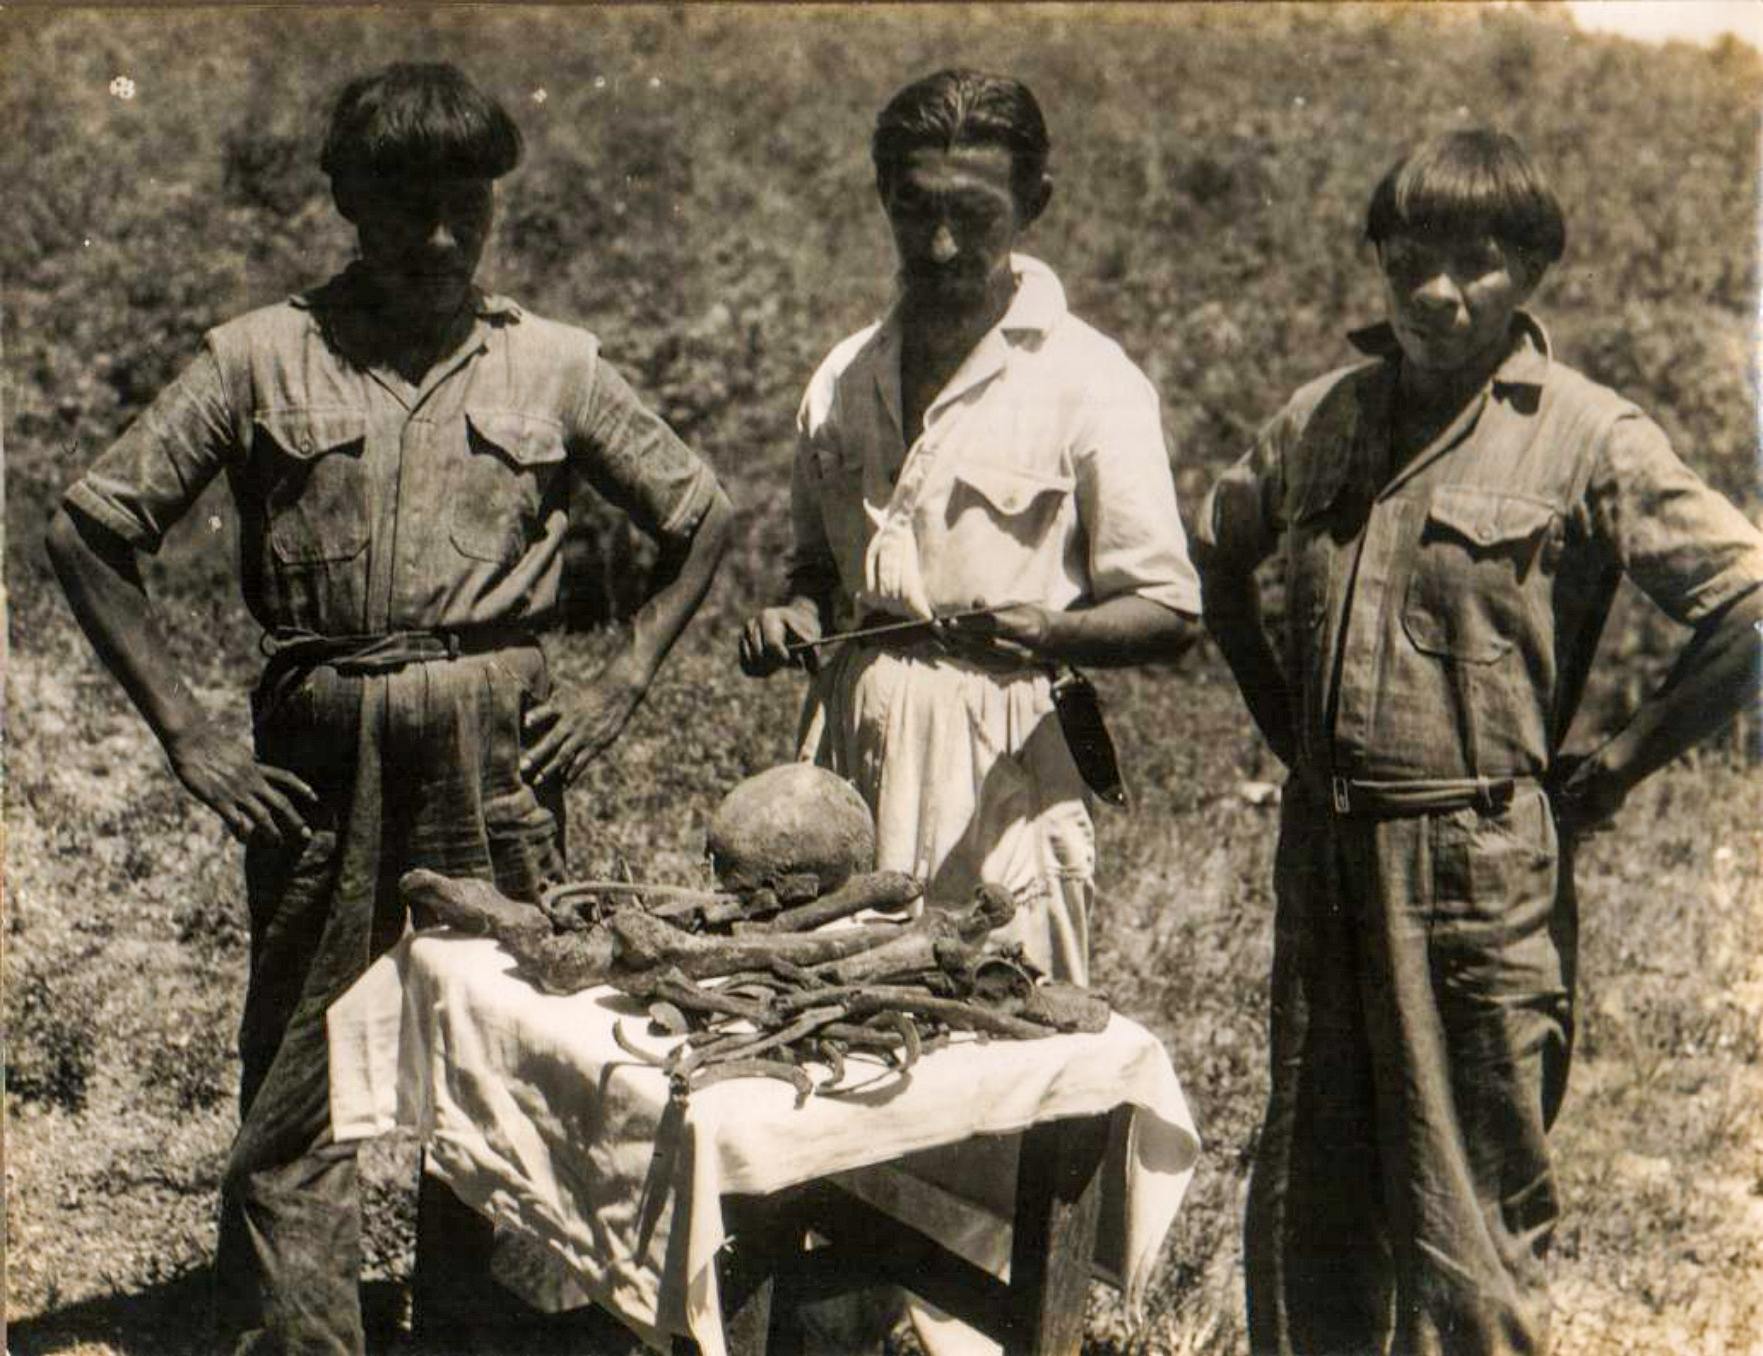 Orlando Villas Bôas and two Kalapalo Indians with Cel's bone. Fawcett found in the exact place where the elders recounted her death. 1952 photo. CVB archive of the Villas Bôas family